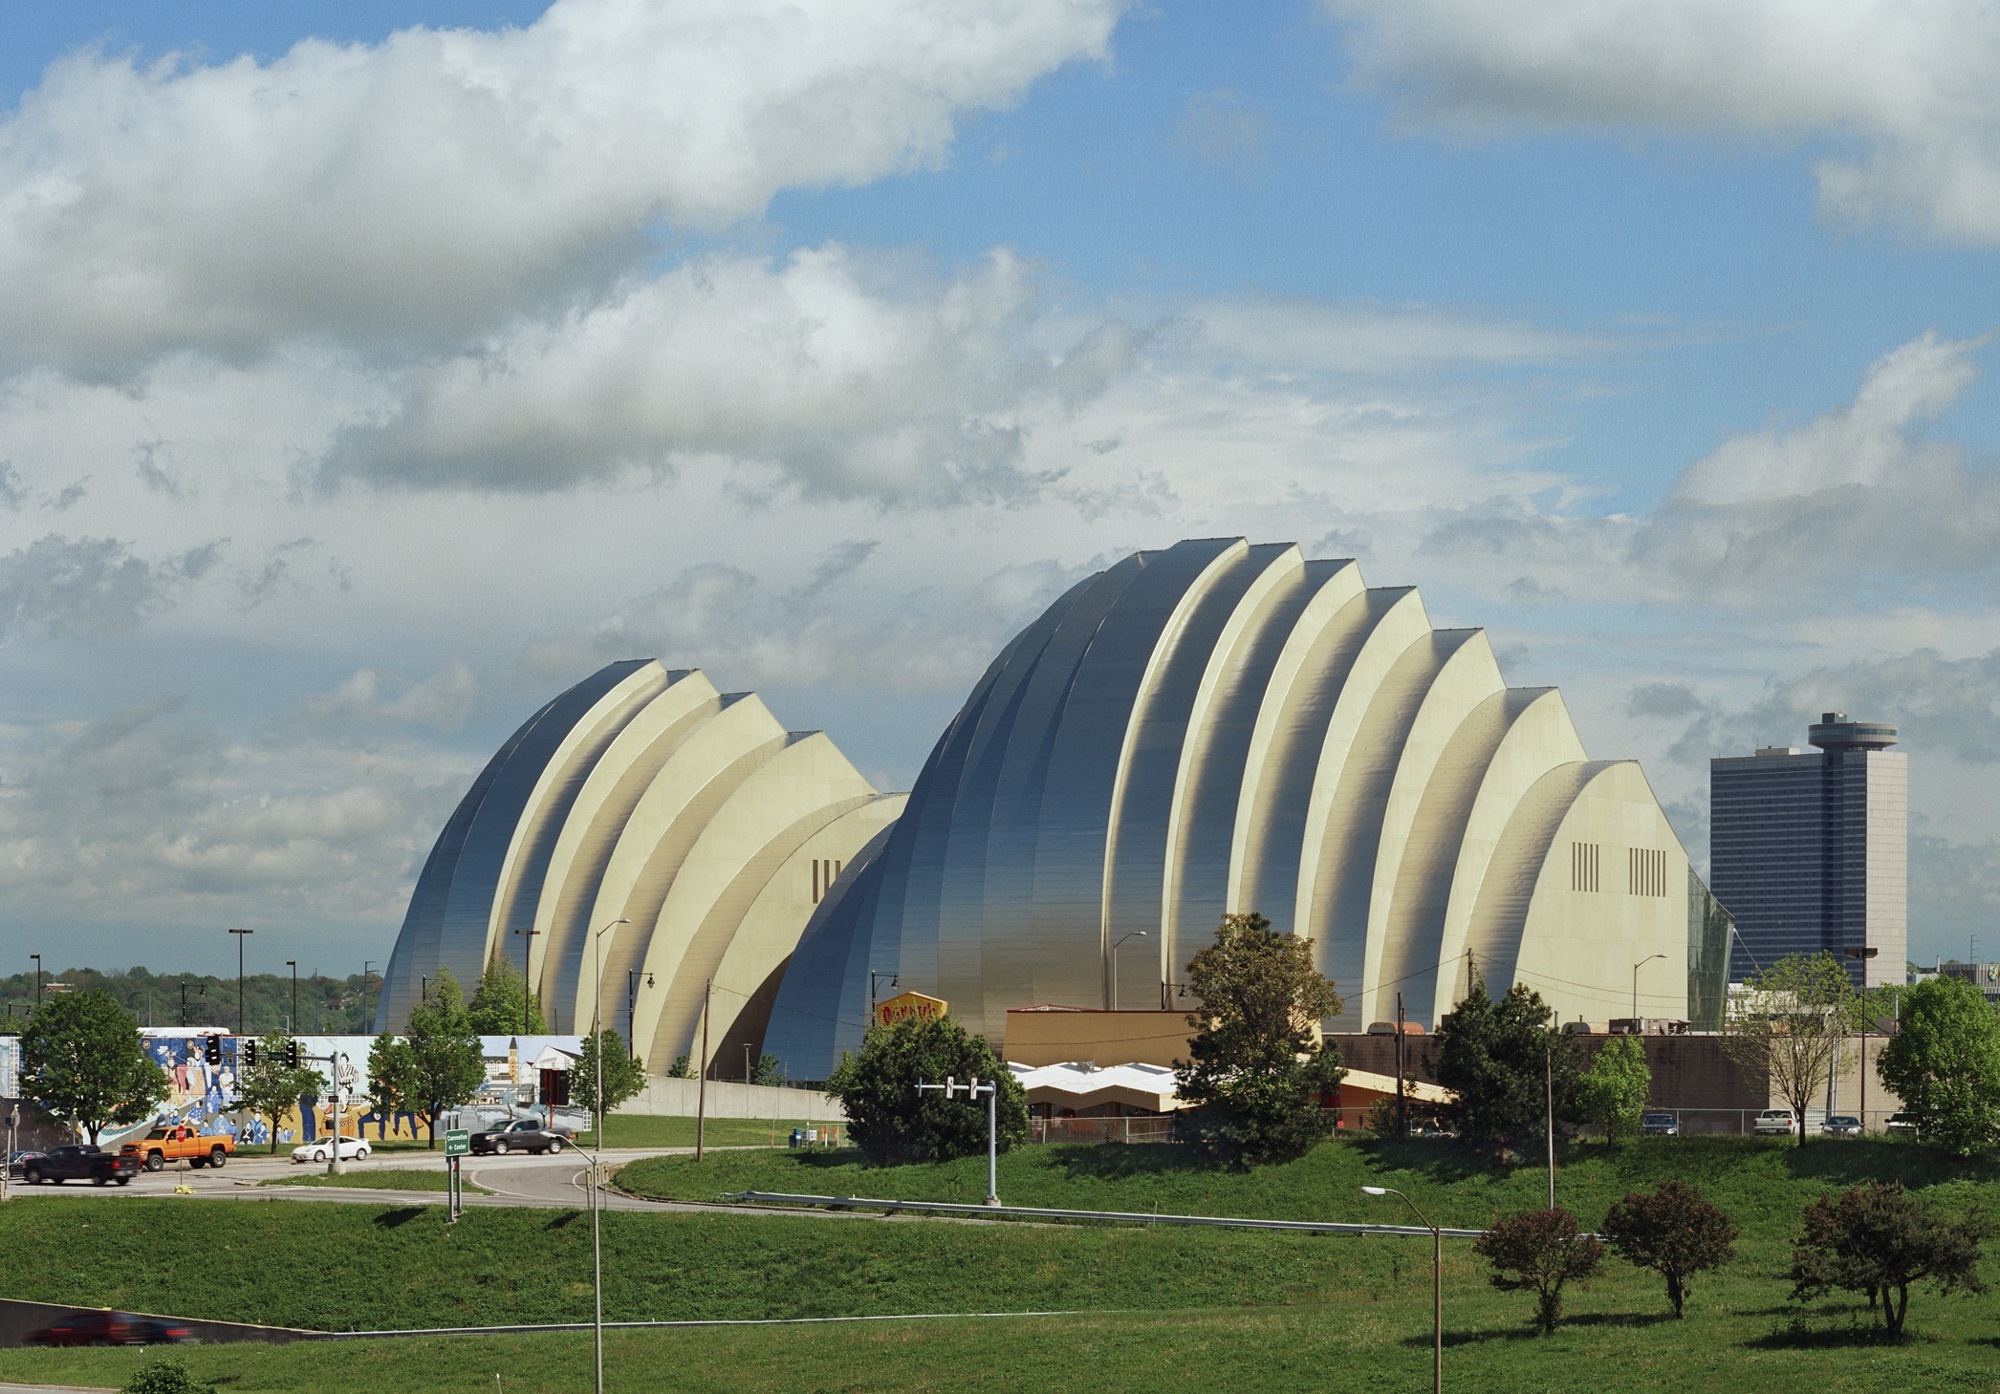 Opened in 2011, Kansas City’s Kauffman Center for the Performing Arts features two performance venues and houses three organizations: the Kansas City Symphony, the Kansas City Ballet and the Lyric Opera of Kansas City.